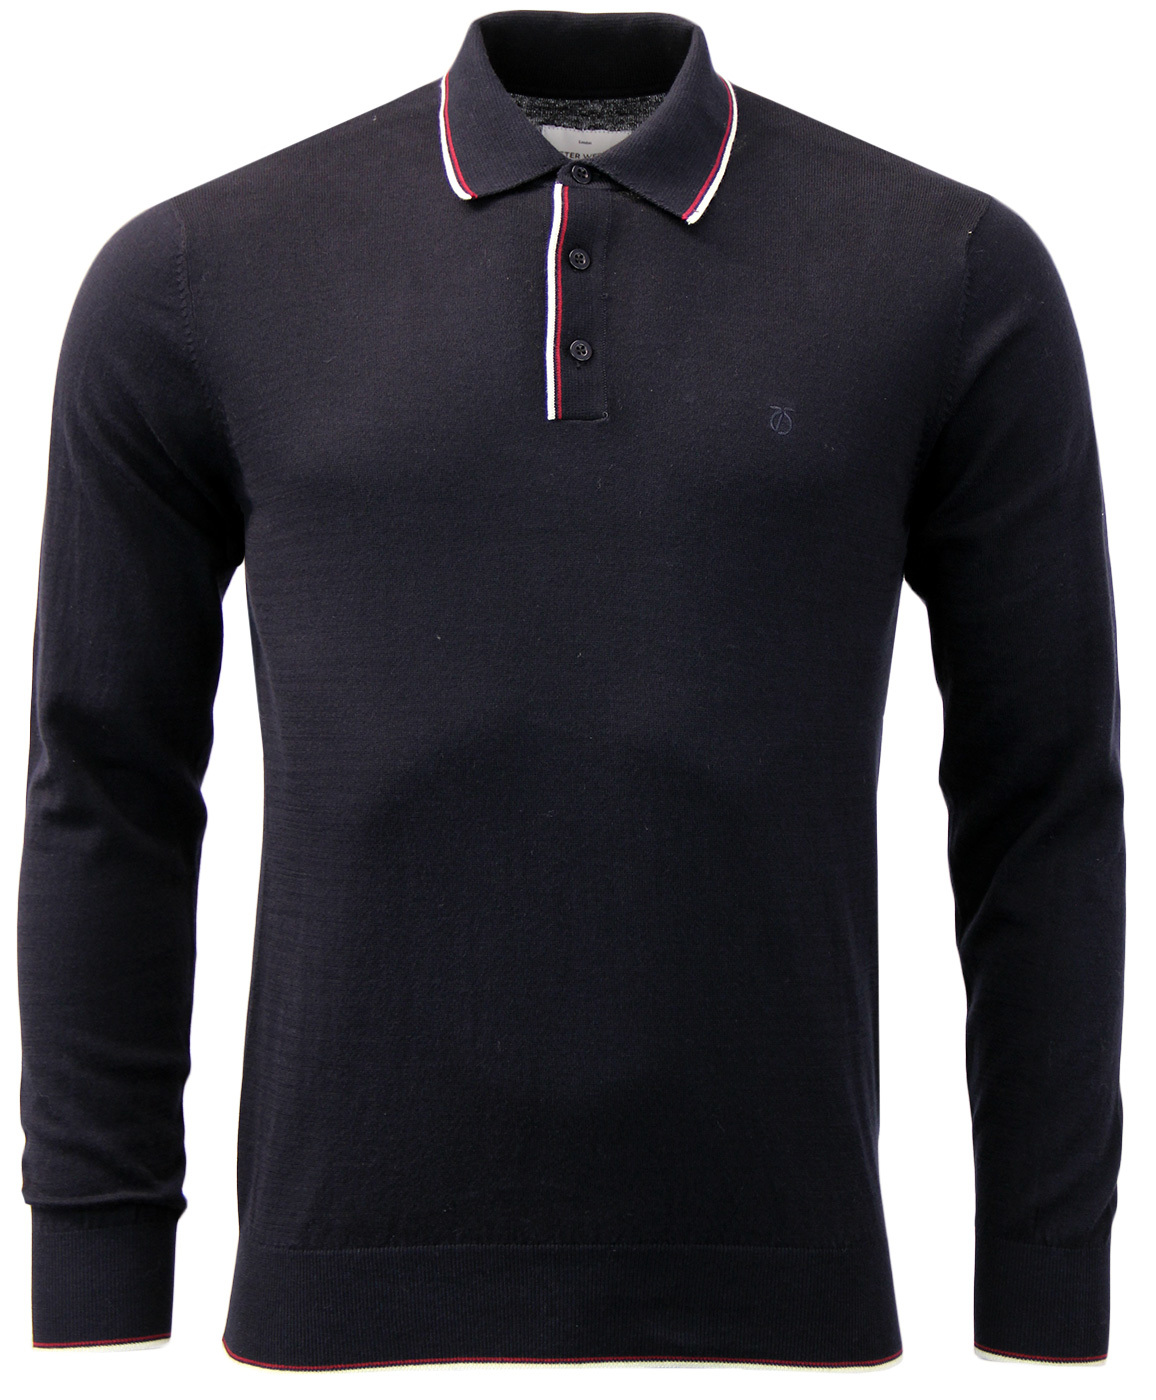 Cristo PETER WERTH 1960s Mod Tipped Knitted Polo